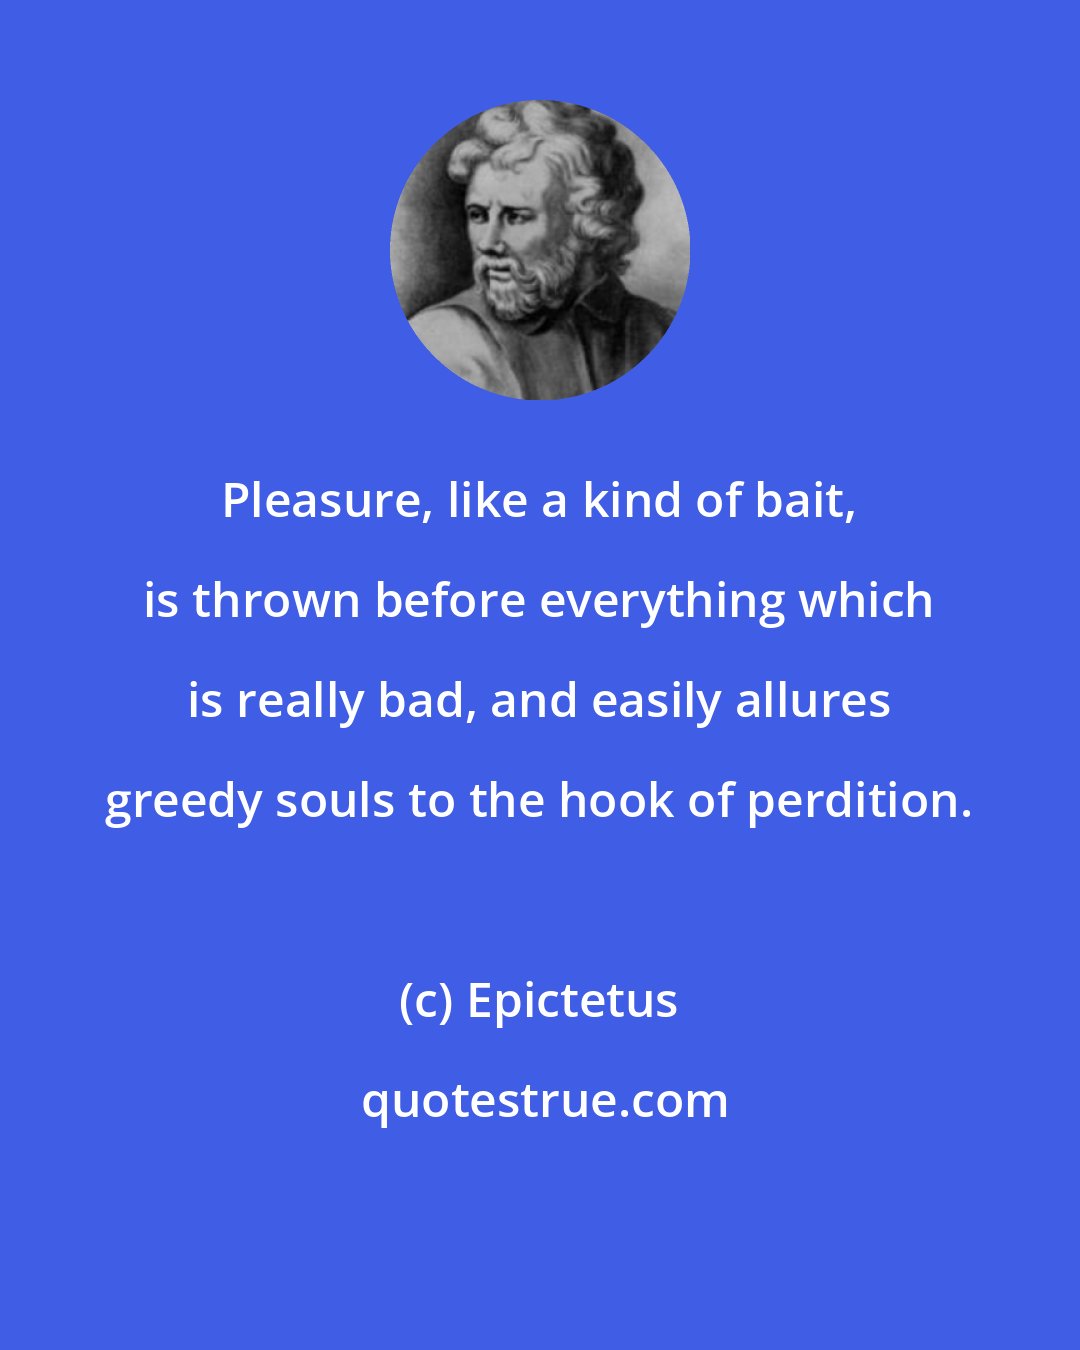 Epictetus: Pleasure, like a kind of bait, is thrown before everything which is really bad, and easily allures greedy souls to the hook of perdition.